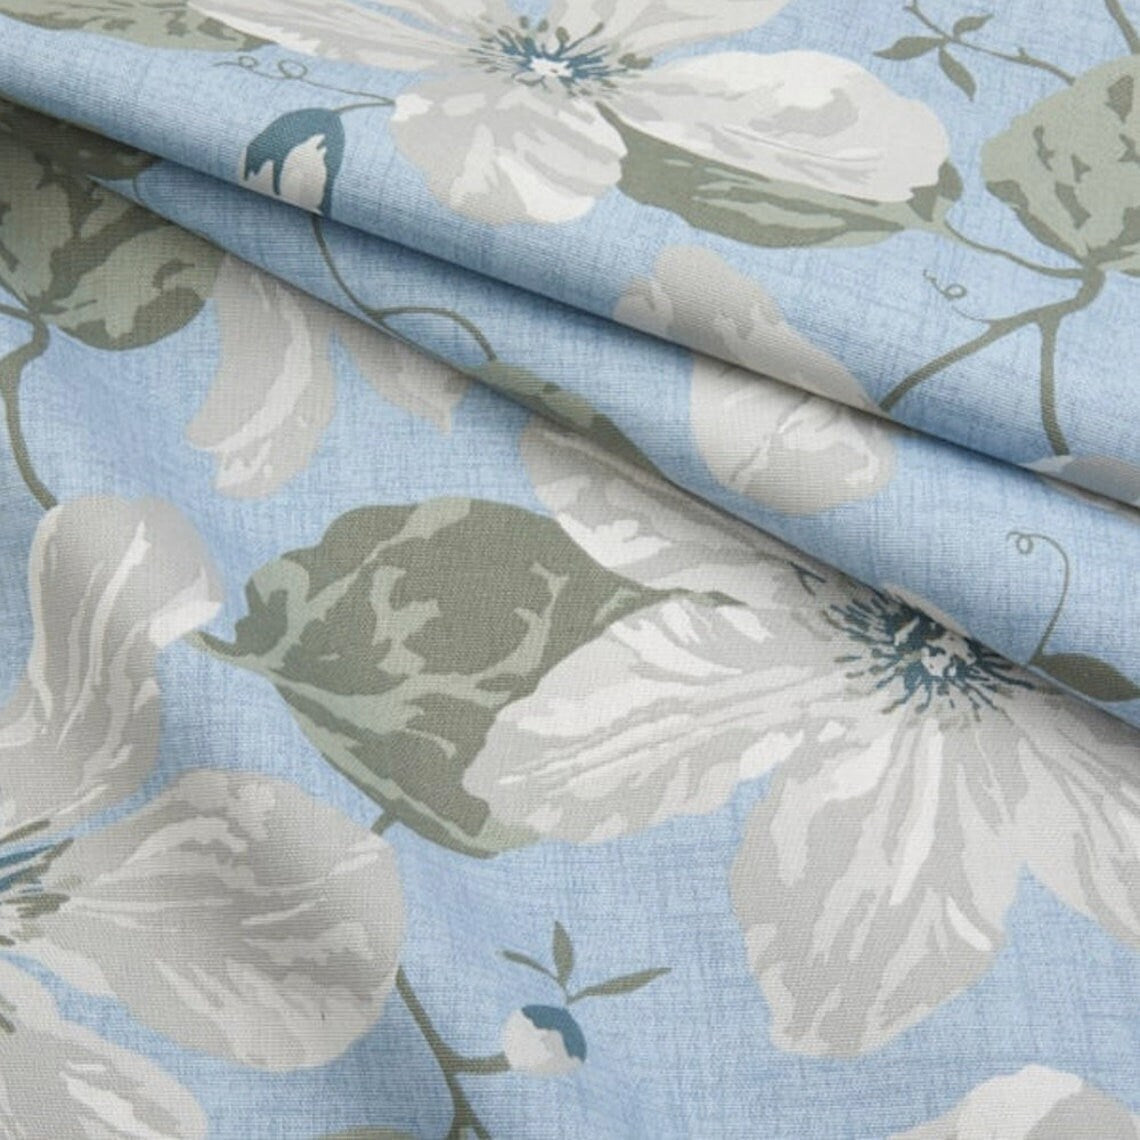 rod pocket curtains in nelly antique blue floral, large scale